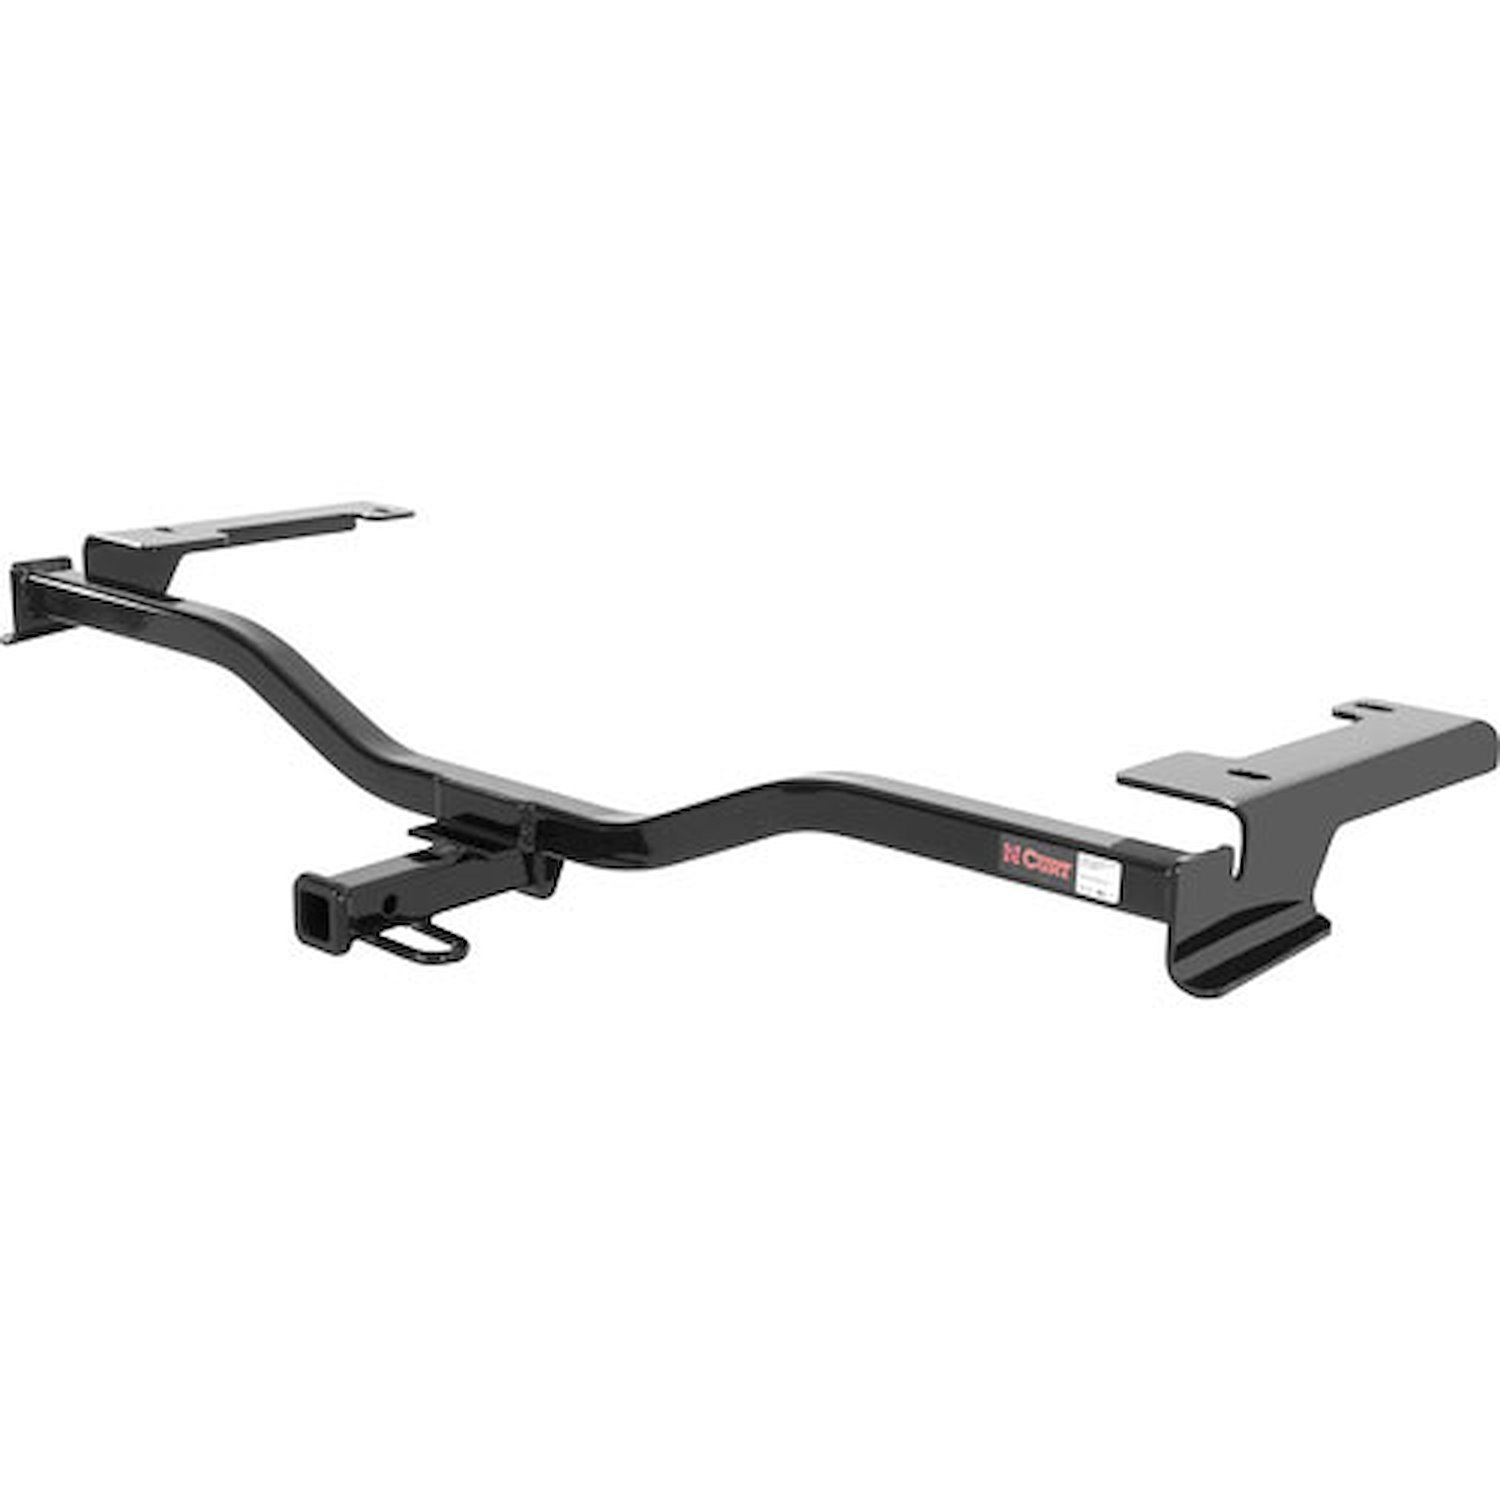 Class I Receiver Hitch 2010-12 Fusion/Lincoln MKZ